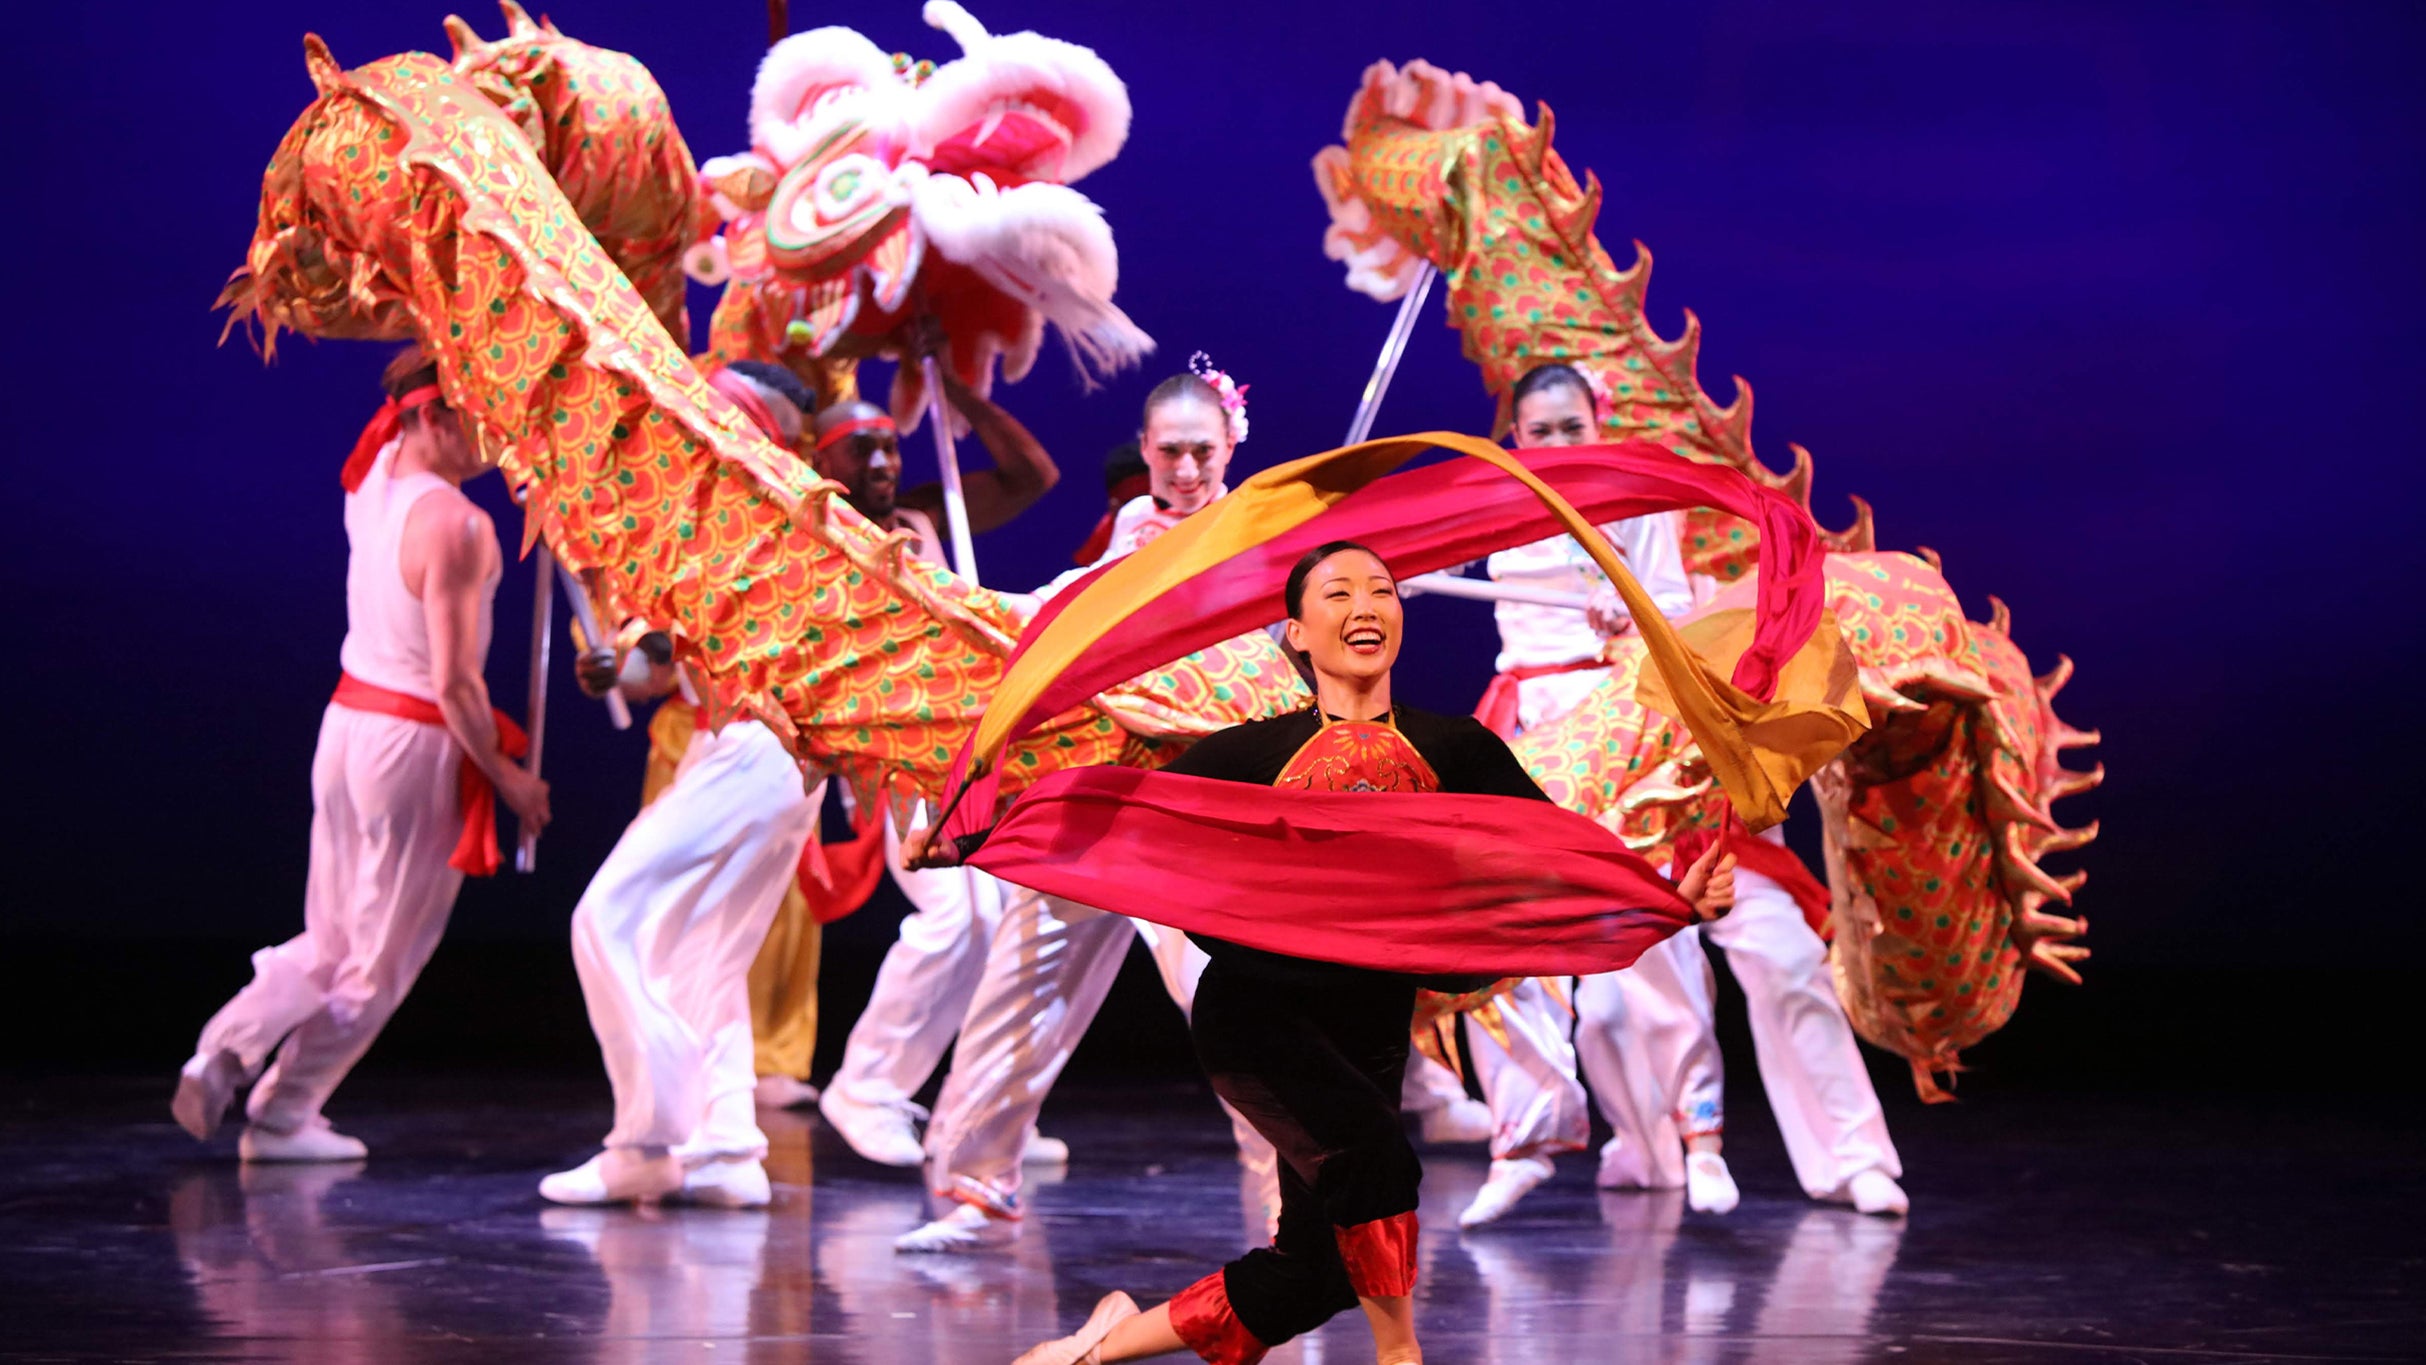 Lunar New Year: Celebrating The Year Of The Dragon free presale listing for show tickets in Queens, NY (Kupferberg Center for the Arts)